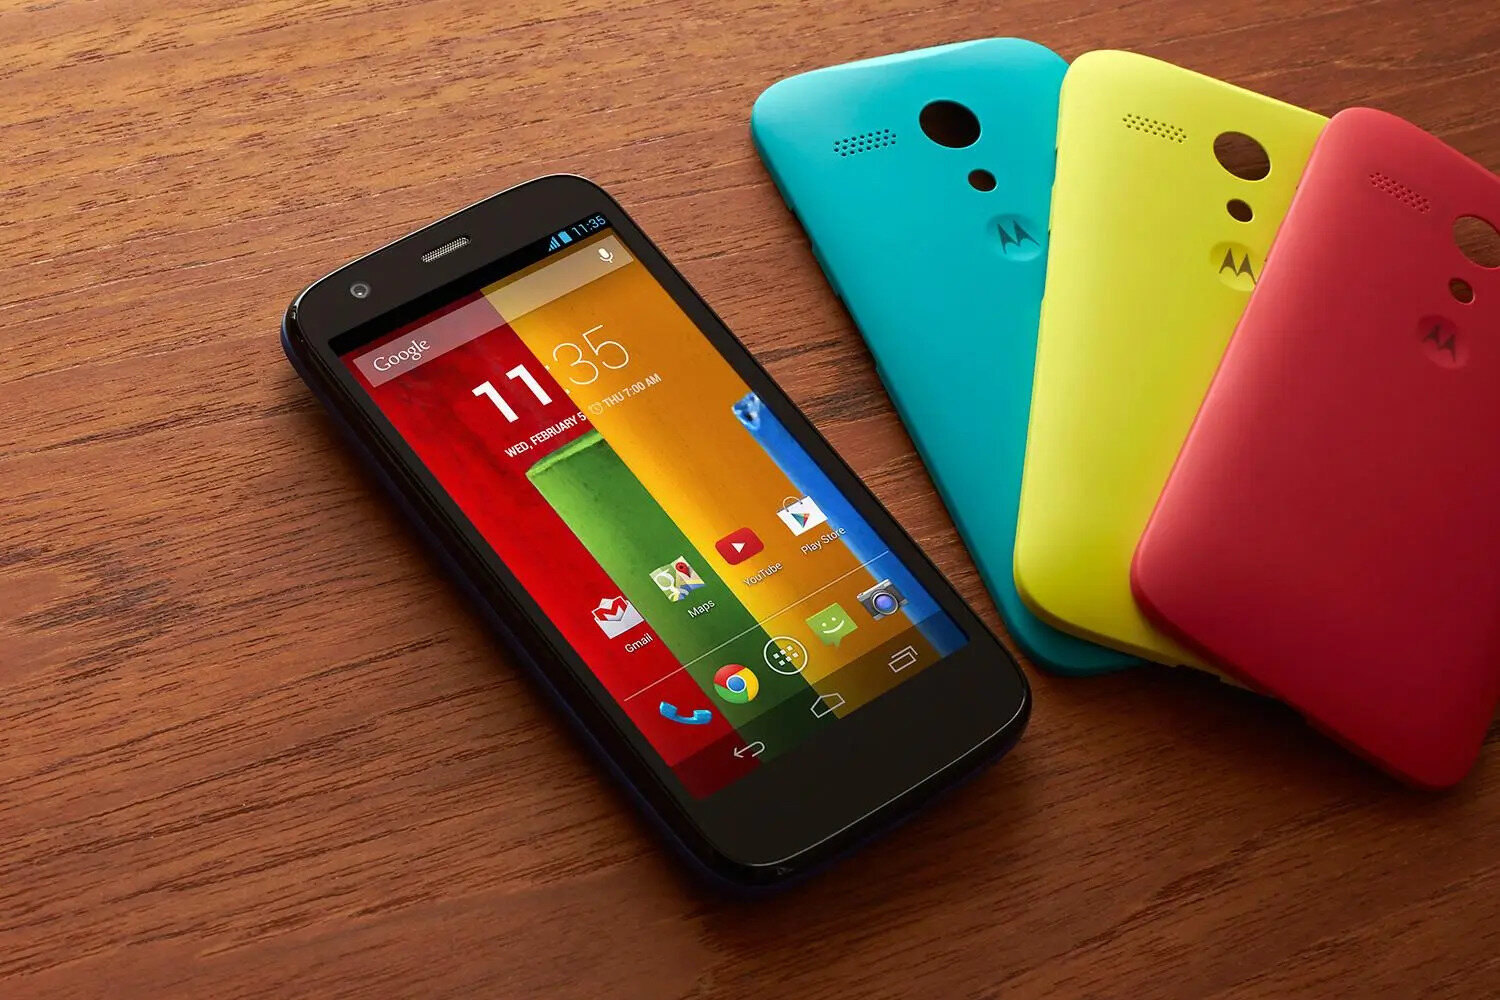 backing-up-texts-on-moto-g-phone-easy-guide